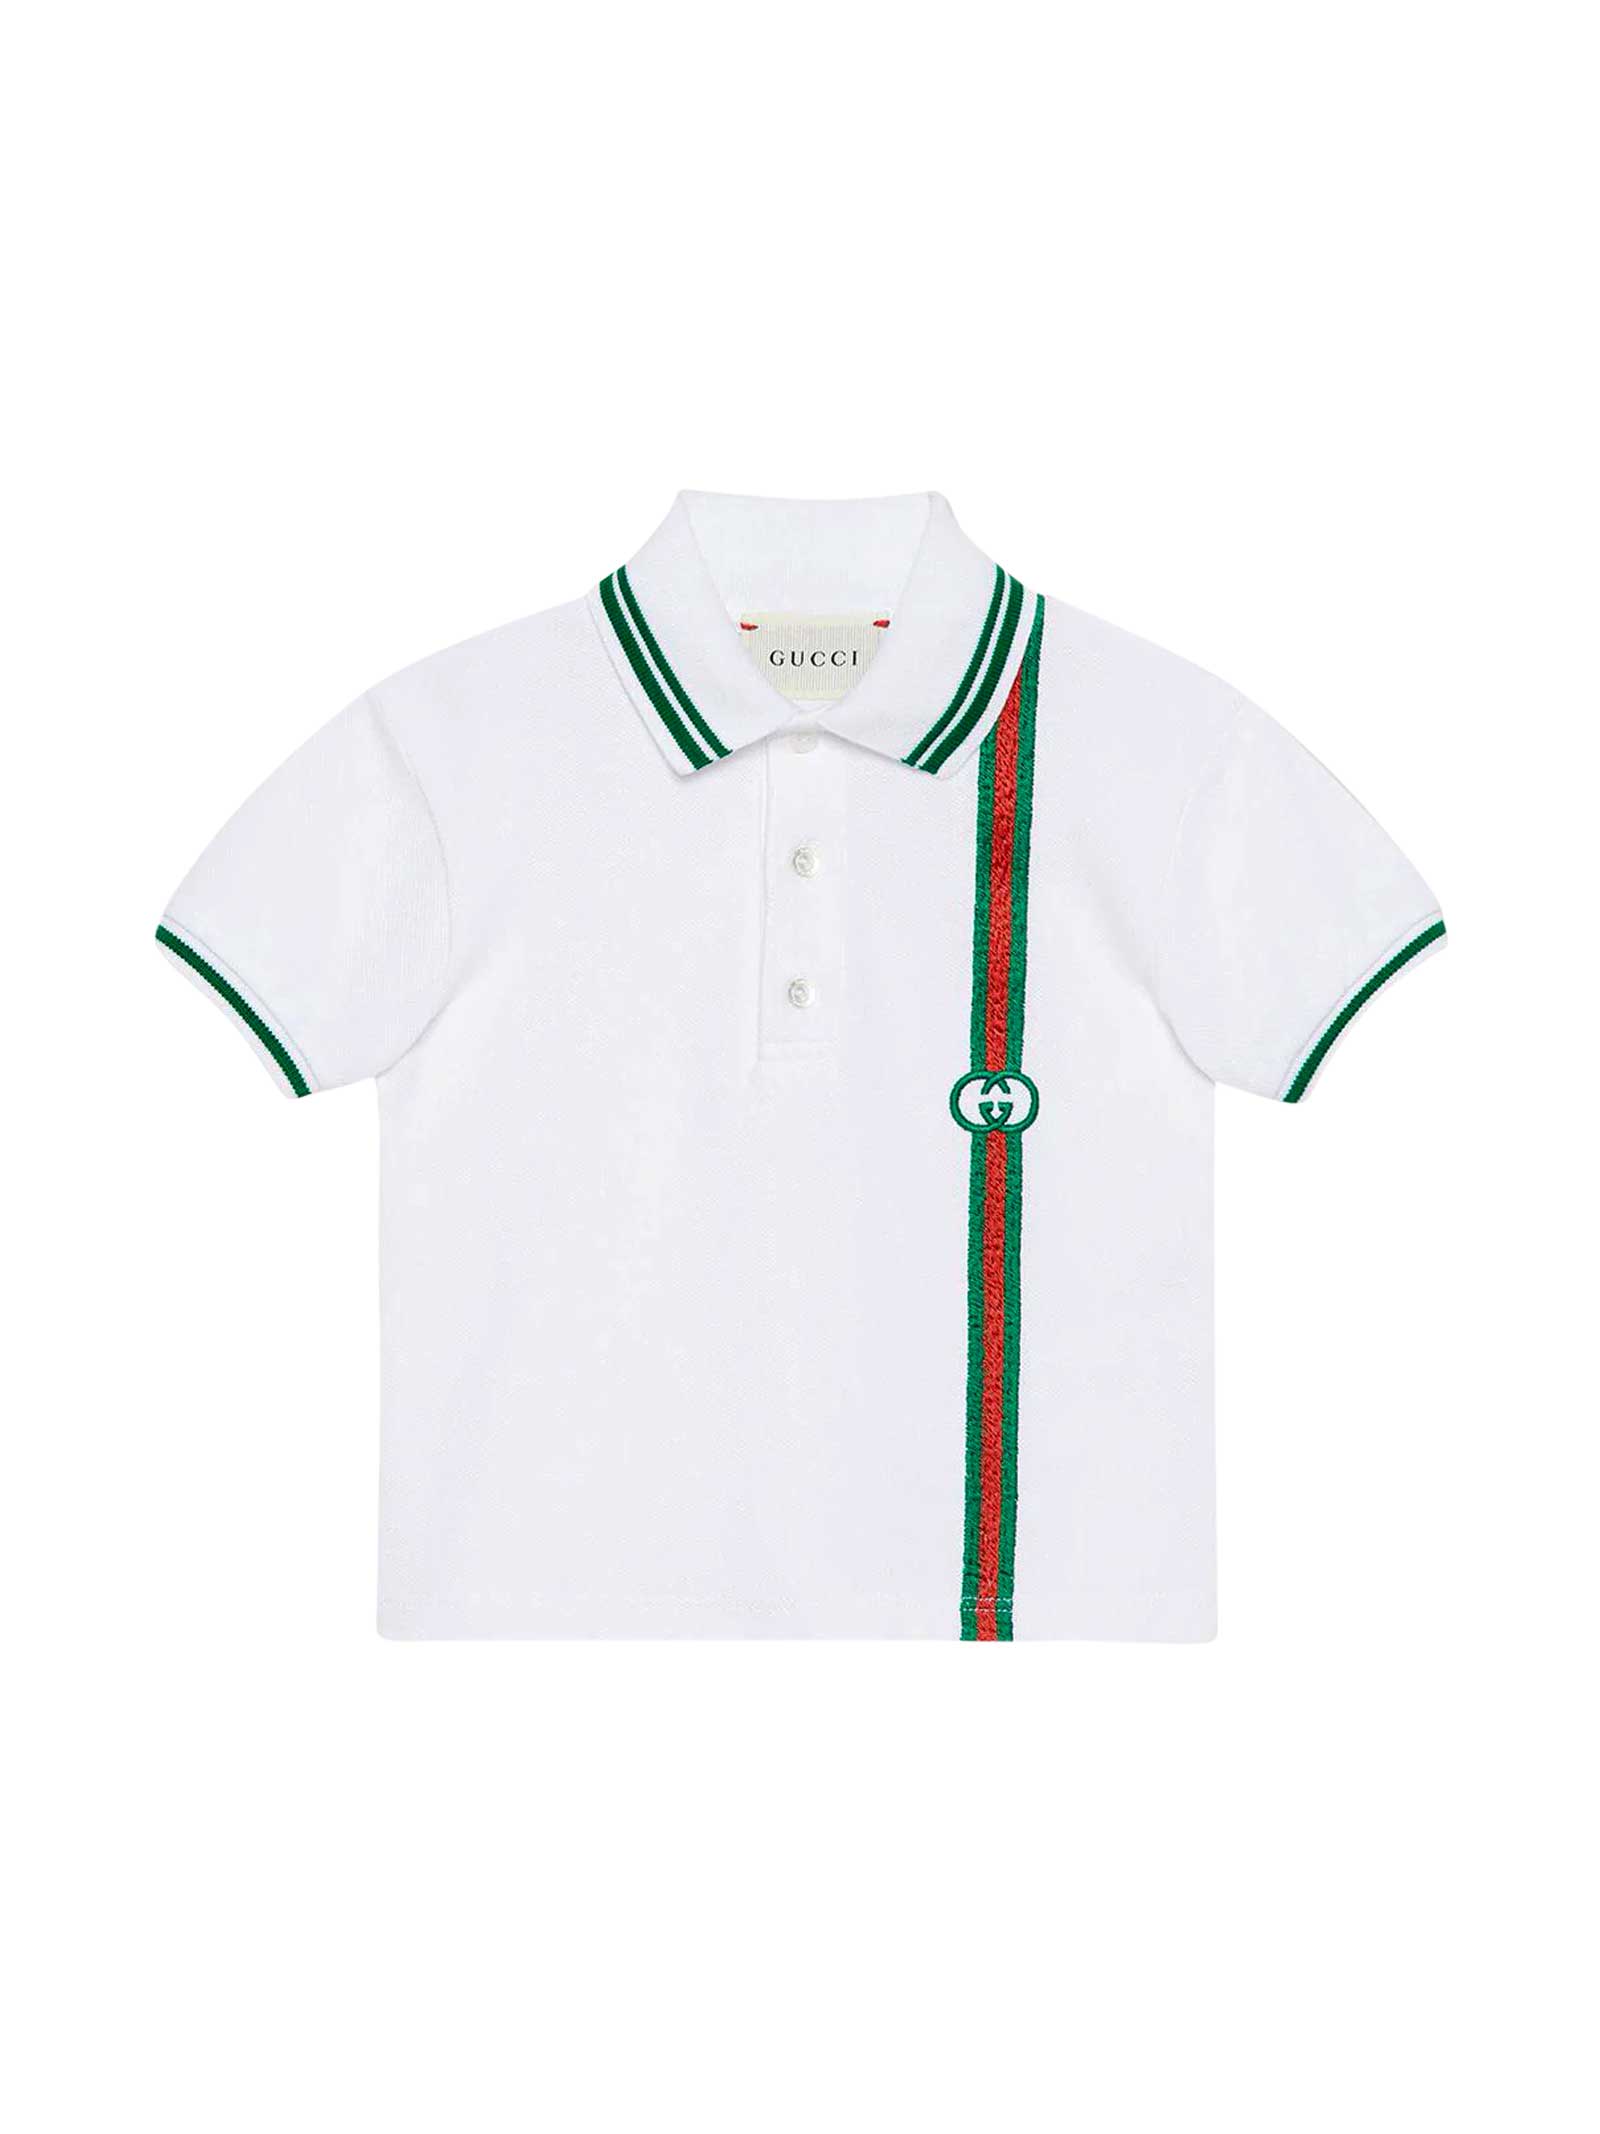 GUCCI WHITE POLO SHIRT WITH GREEN AND RED DETAILS,638455XJC36 9023